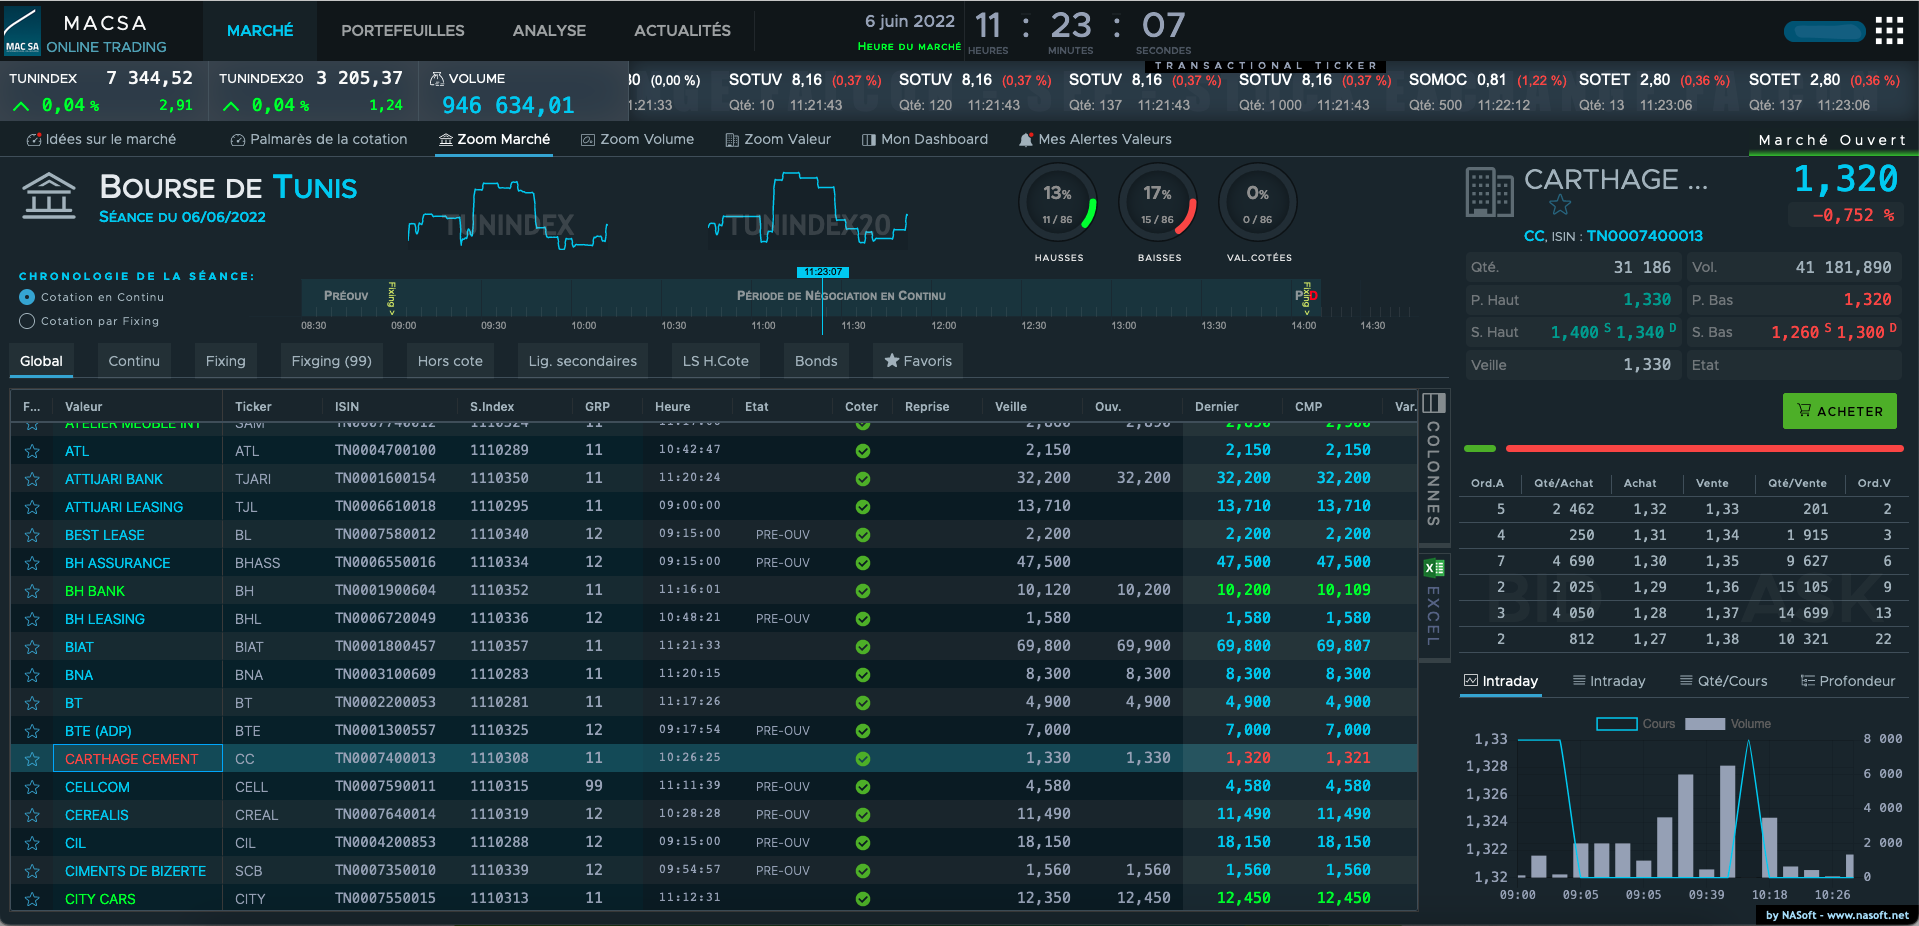 A realtime console displaying a summary of the trading session.
				Each traded company figures in a line with all the trading data.
				The changes can be very easily identified with the colors changes.